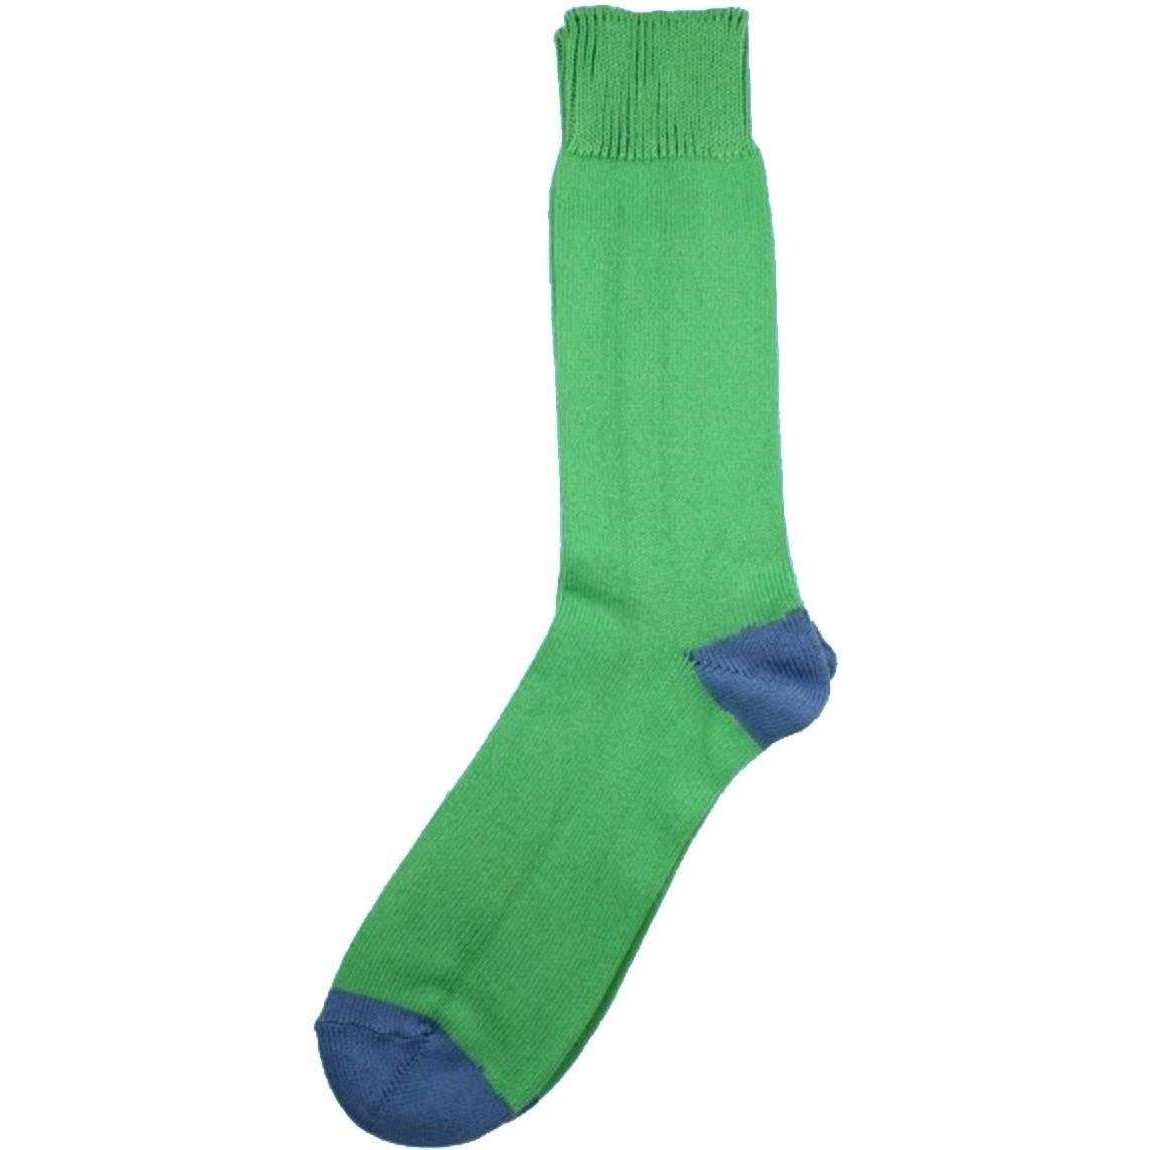 Bassin and Brown Heel and Toe Socks - Green/Blue